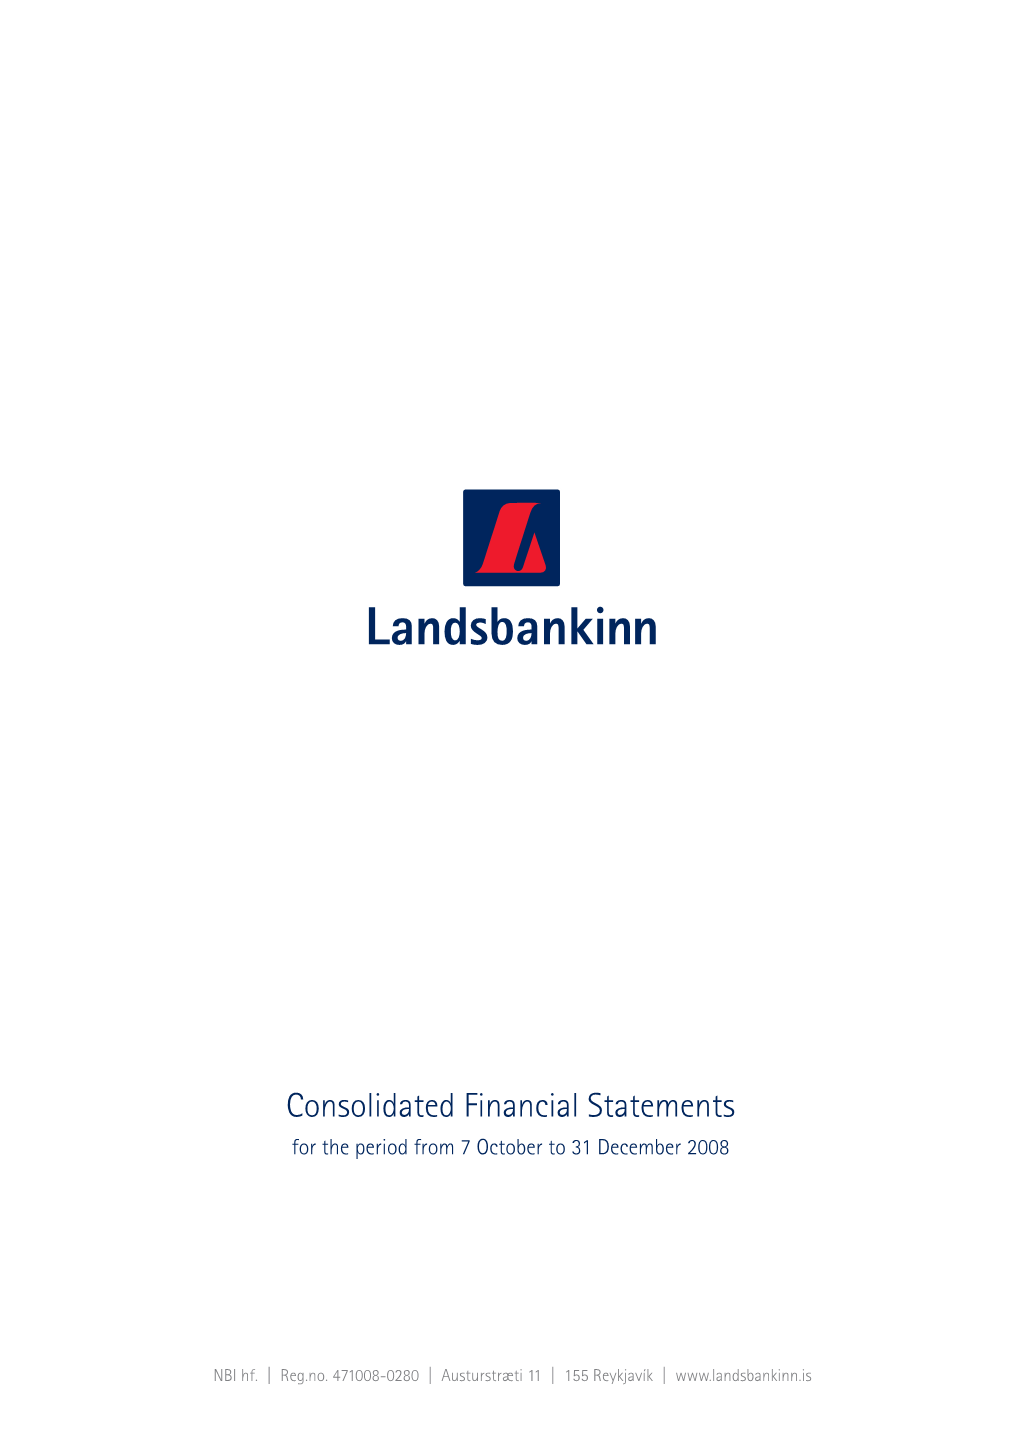 Consolidated Financial Statements for the Period from 7 October to 31 December 2008